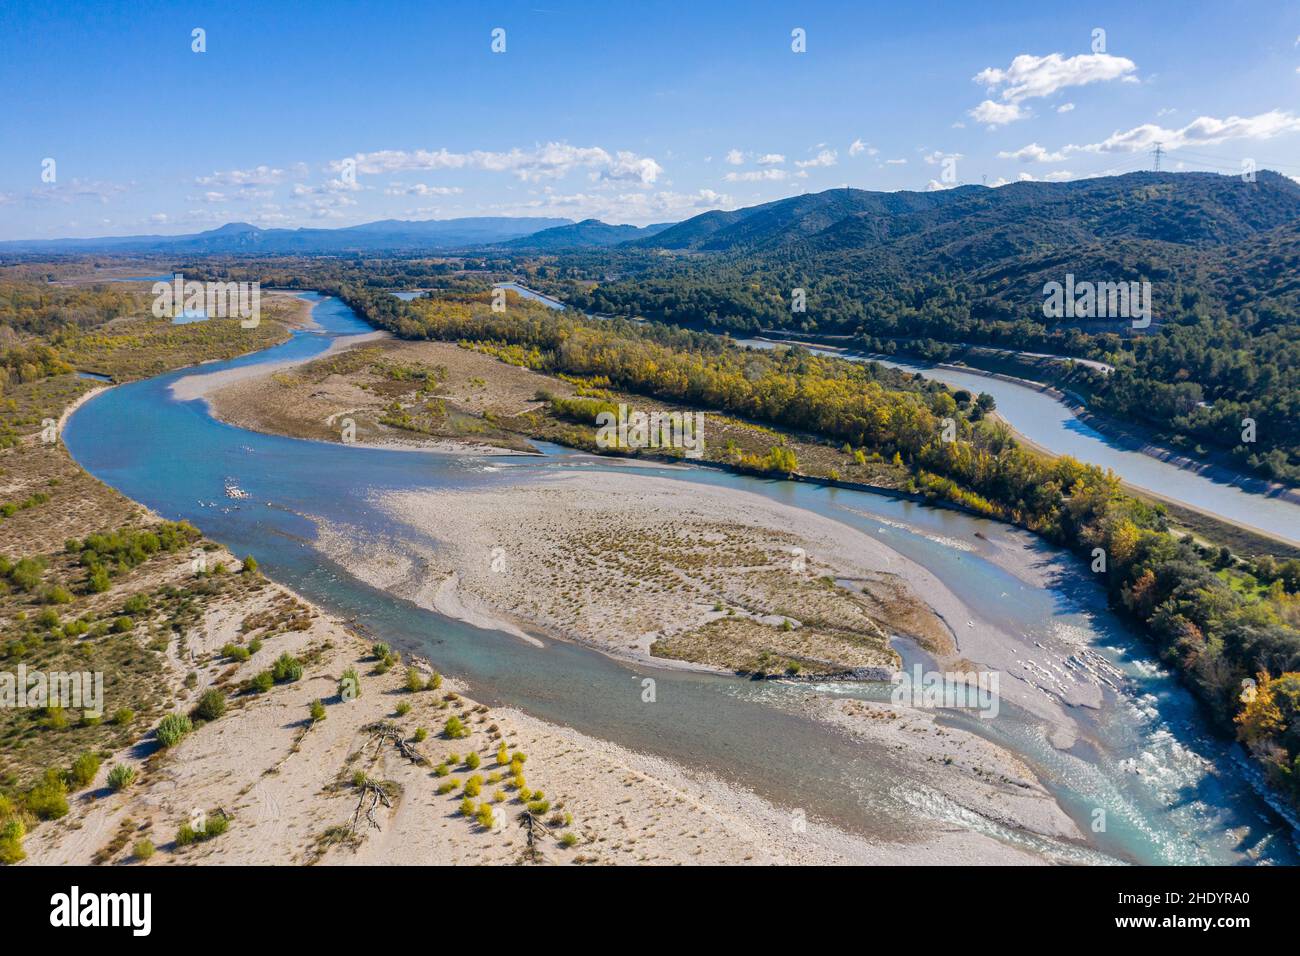 France, Bouches du Rhone, Durance Valley, La Roque d'Antheron, the Durance River and the Canal de l'EDF or Durance machining canal on the right (aeria Stock Photo